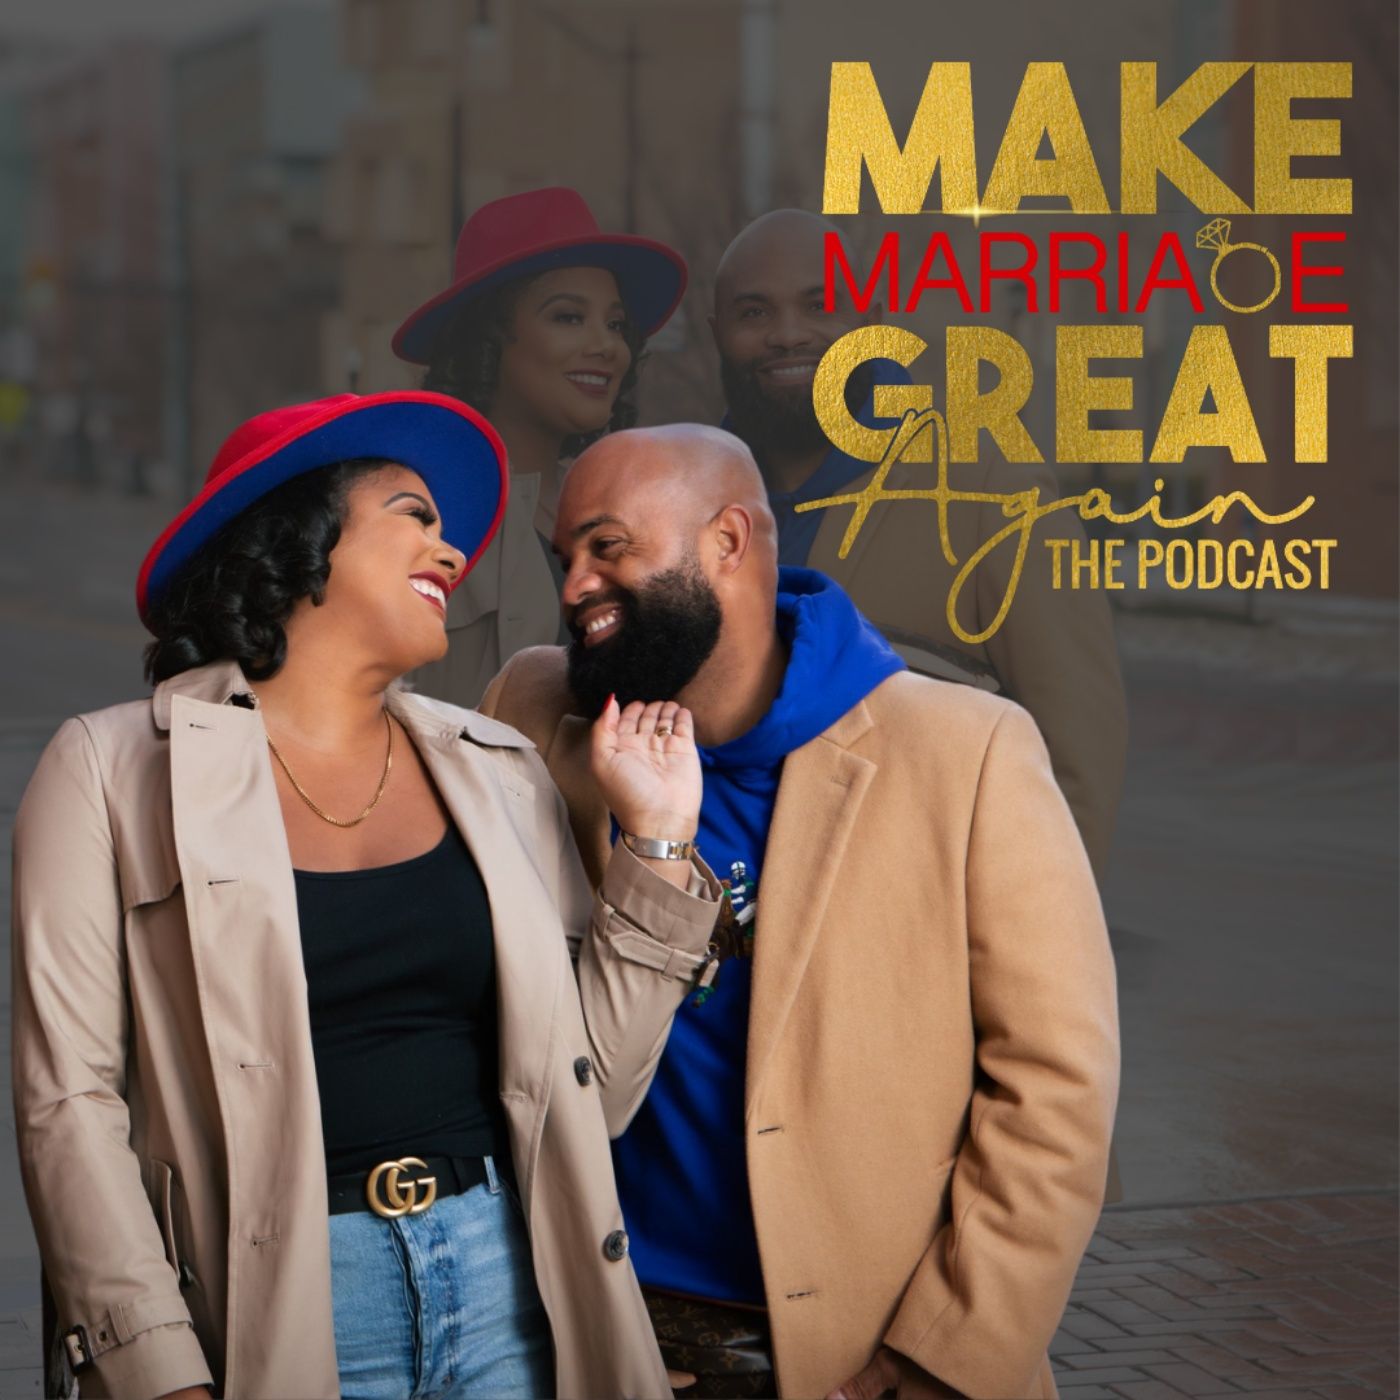 Make Marriage Great Again Podcast